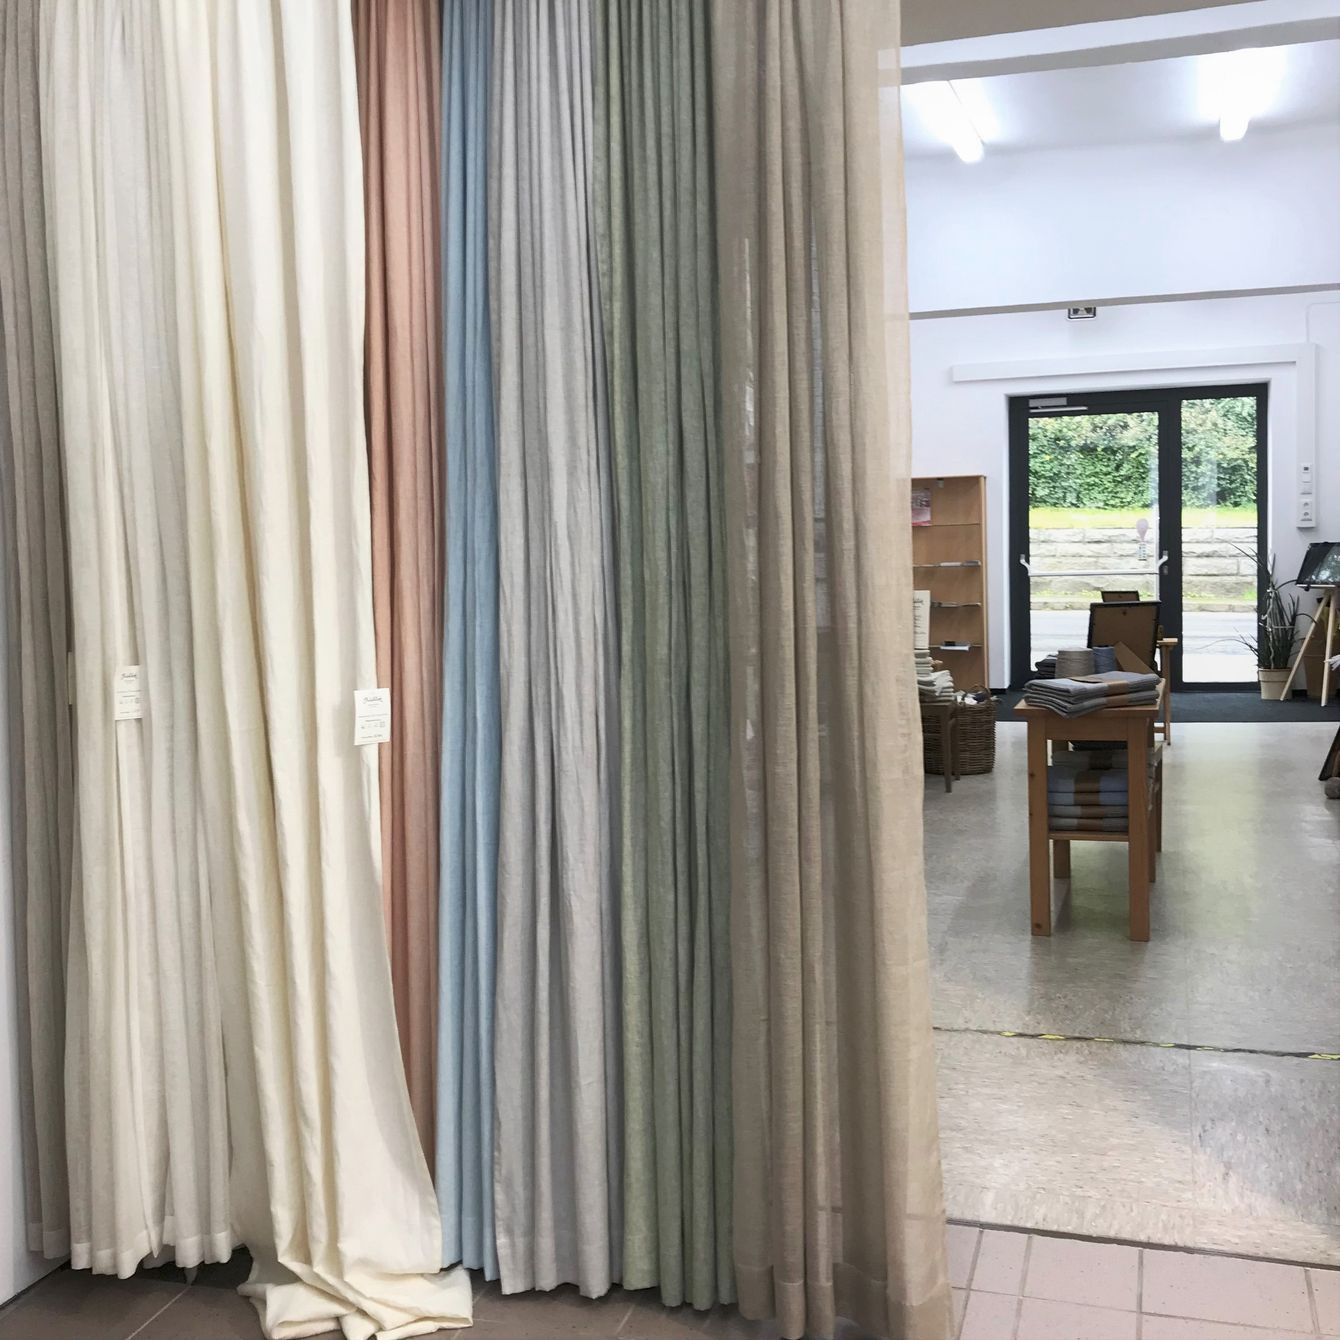 The way to a fitting linen curtain